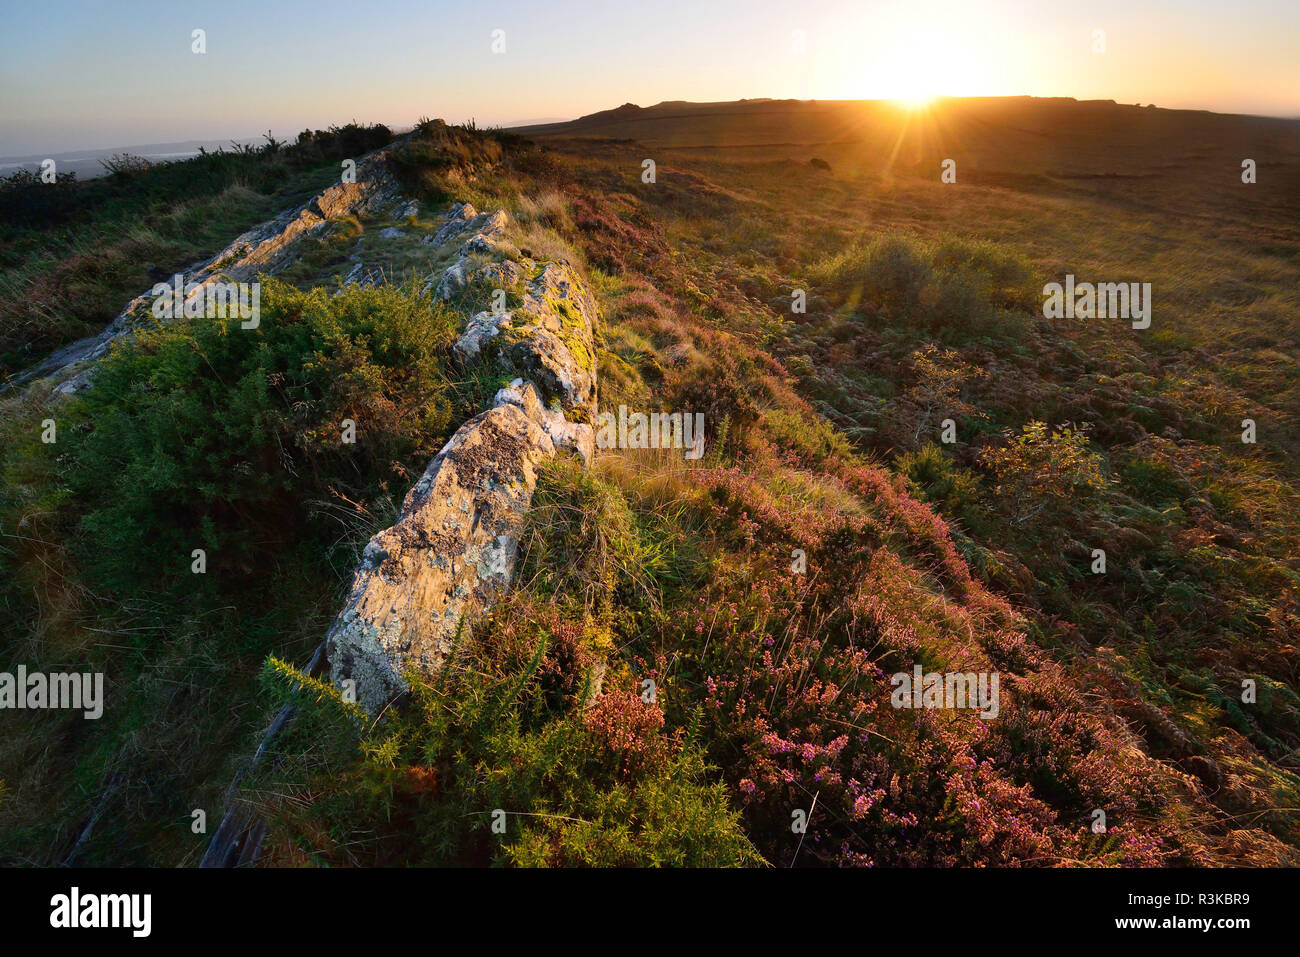 The Monts d Arree mountain range (Brittany, north-western France): sunset over the Cragou moors Stock Photo